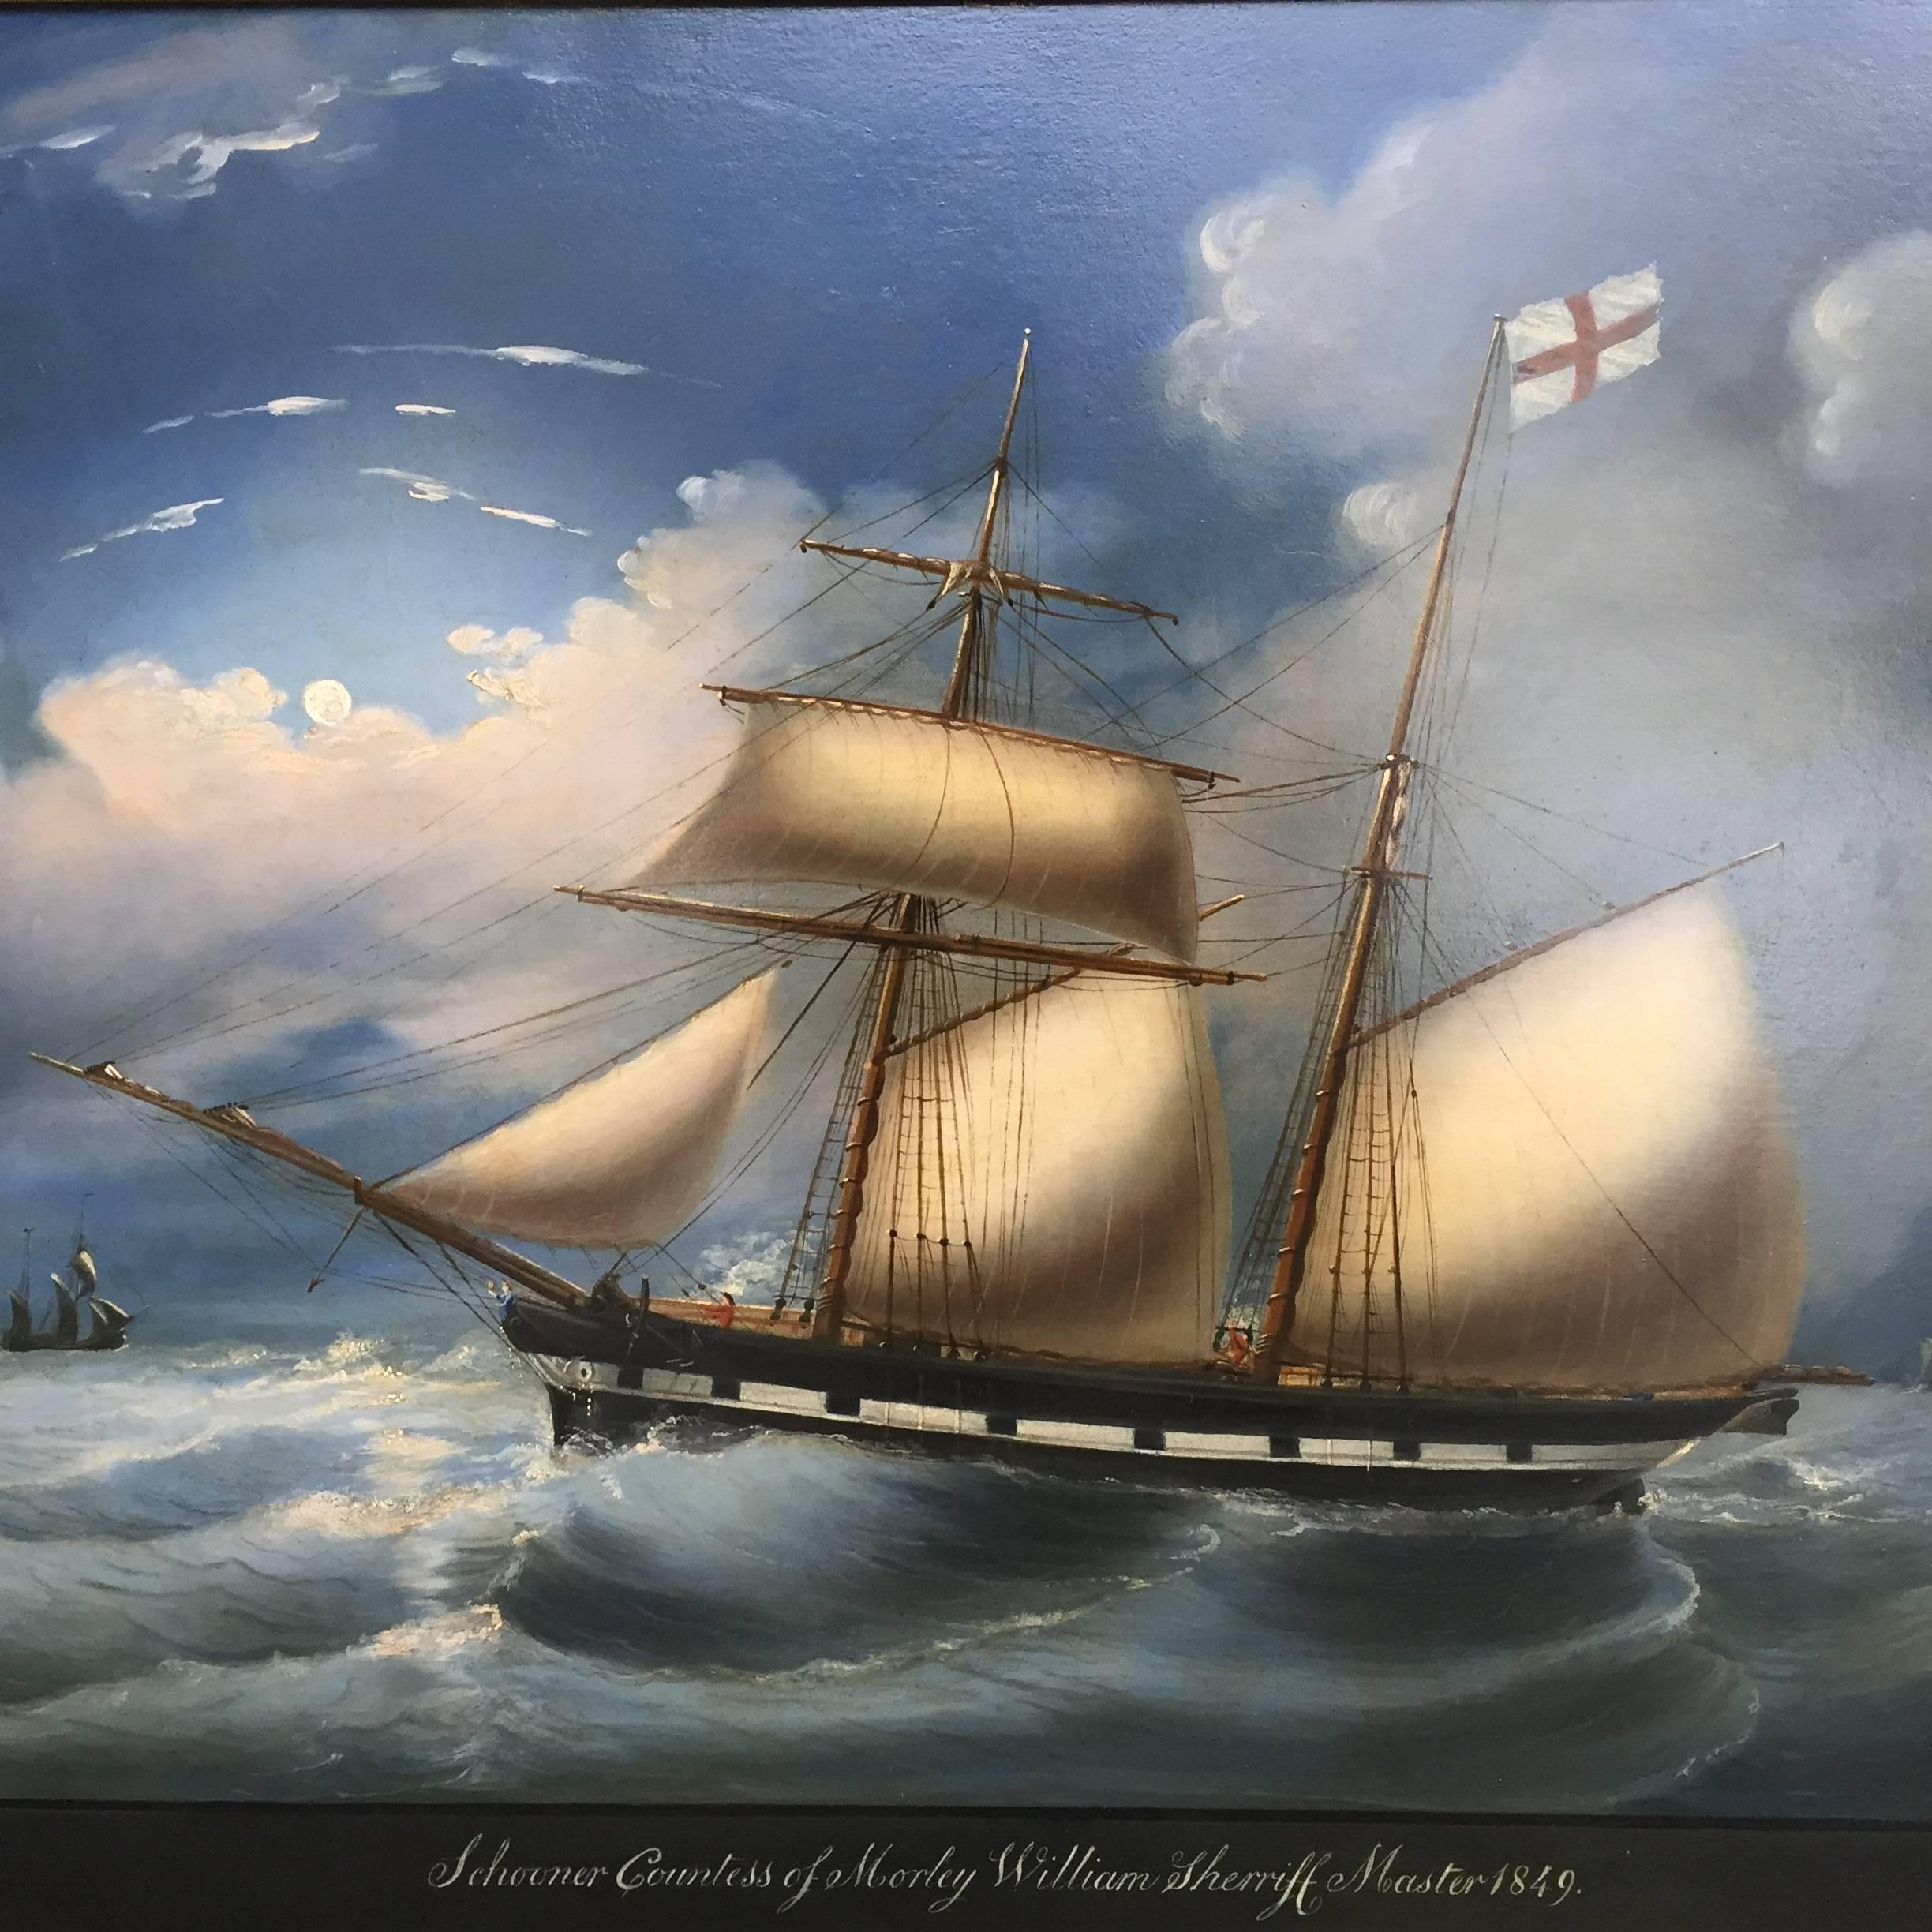 Pair of oil on canvas.

Schooner countess of Morley, William Sherriff Master, entering Leghorn Mole December 19th 1849 and William Sherriff Master, 1849. The schooner Countess of Morley started life as H.M.S.Kangeroo in 1805 and was much involved